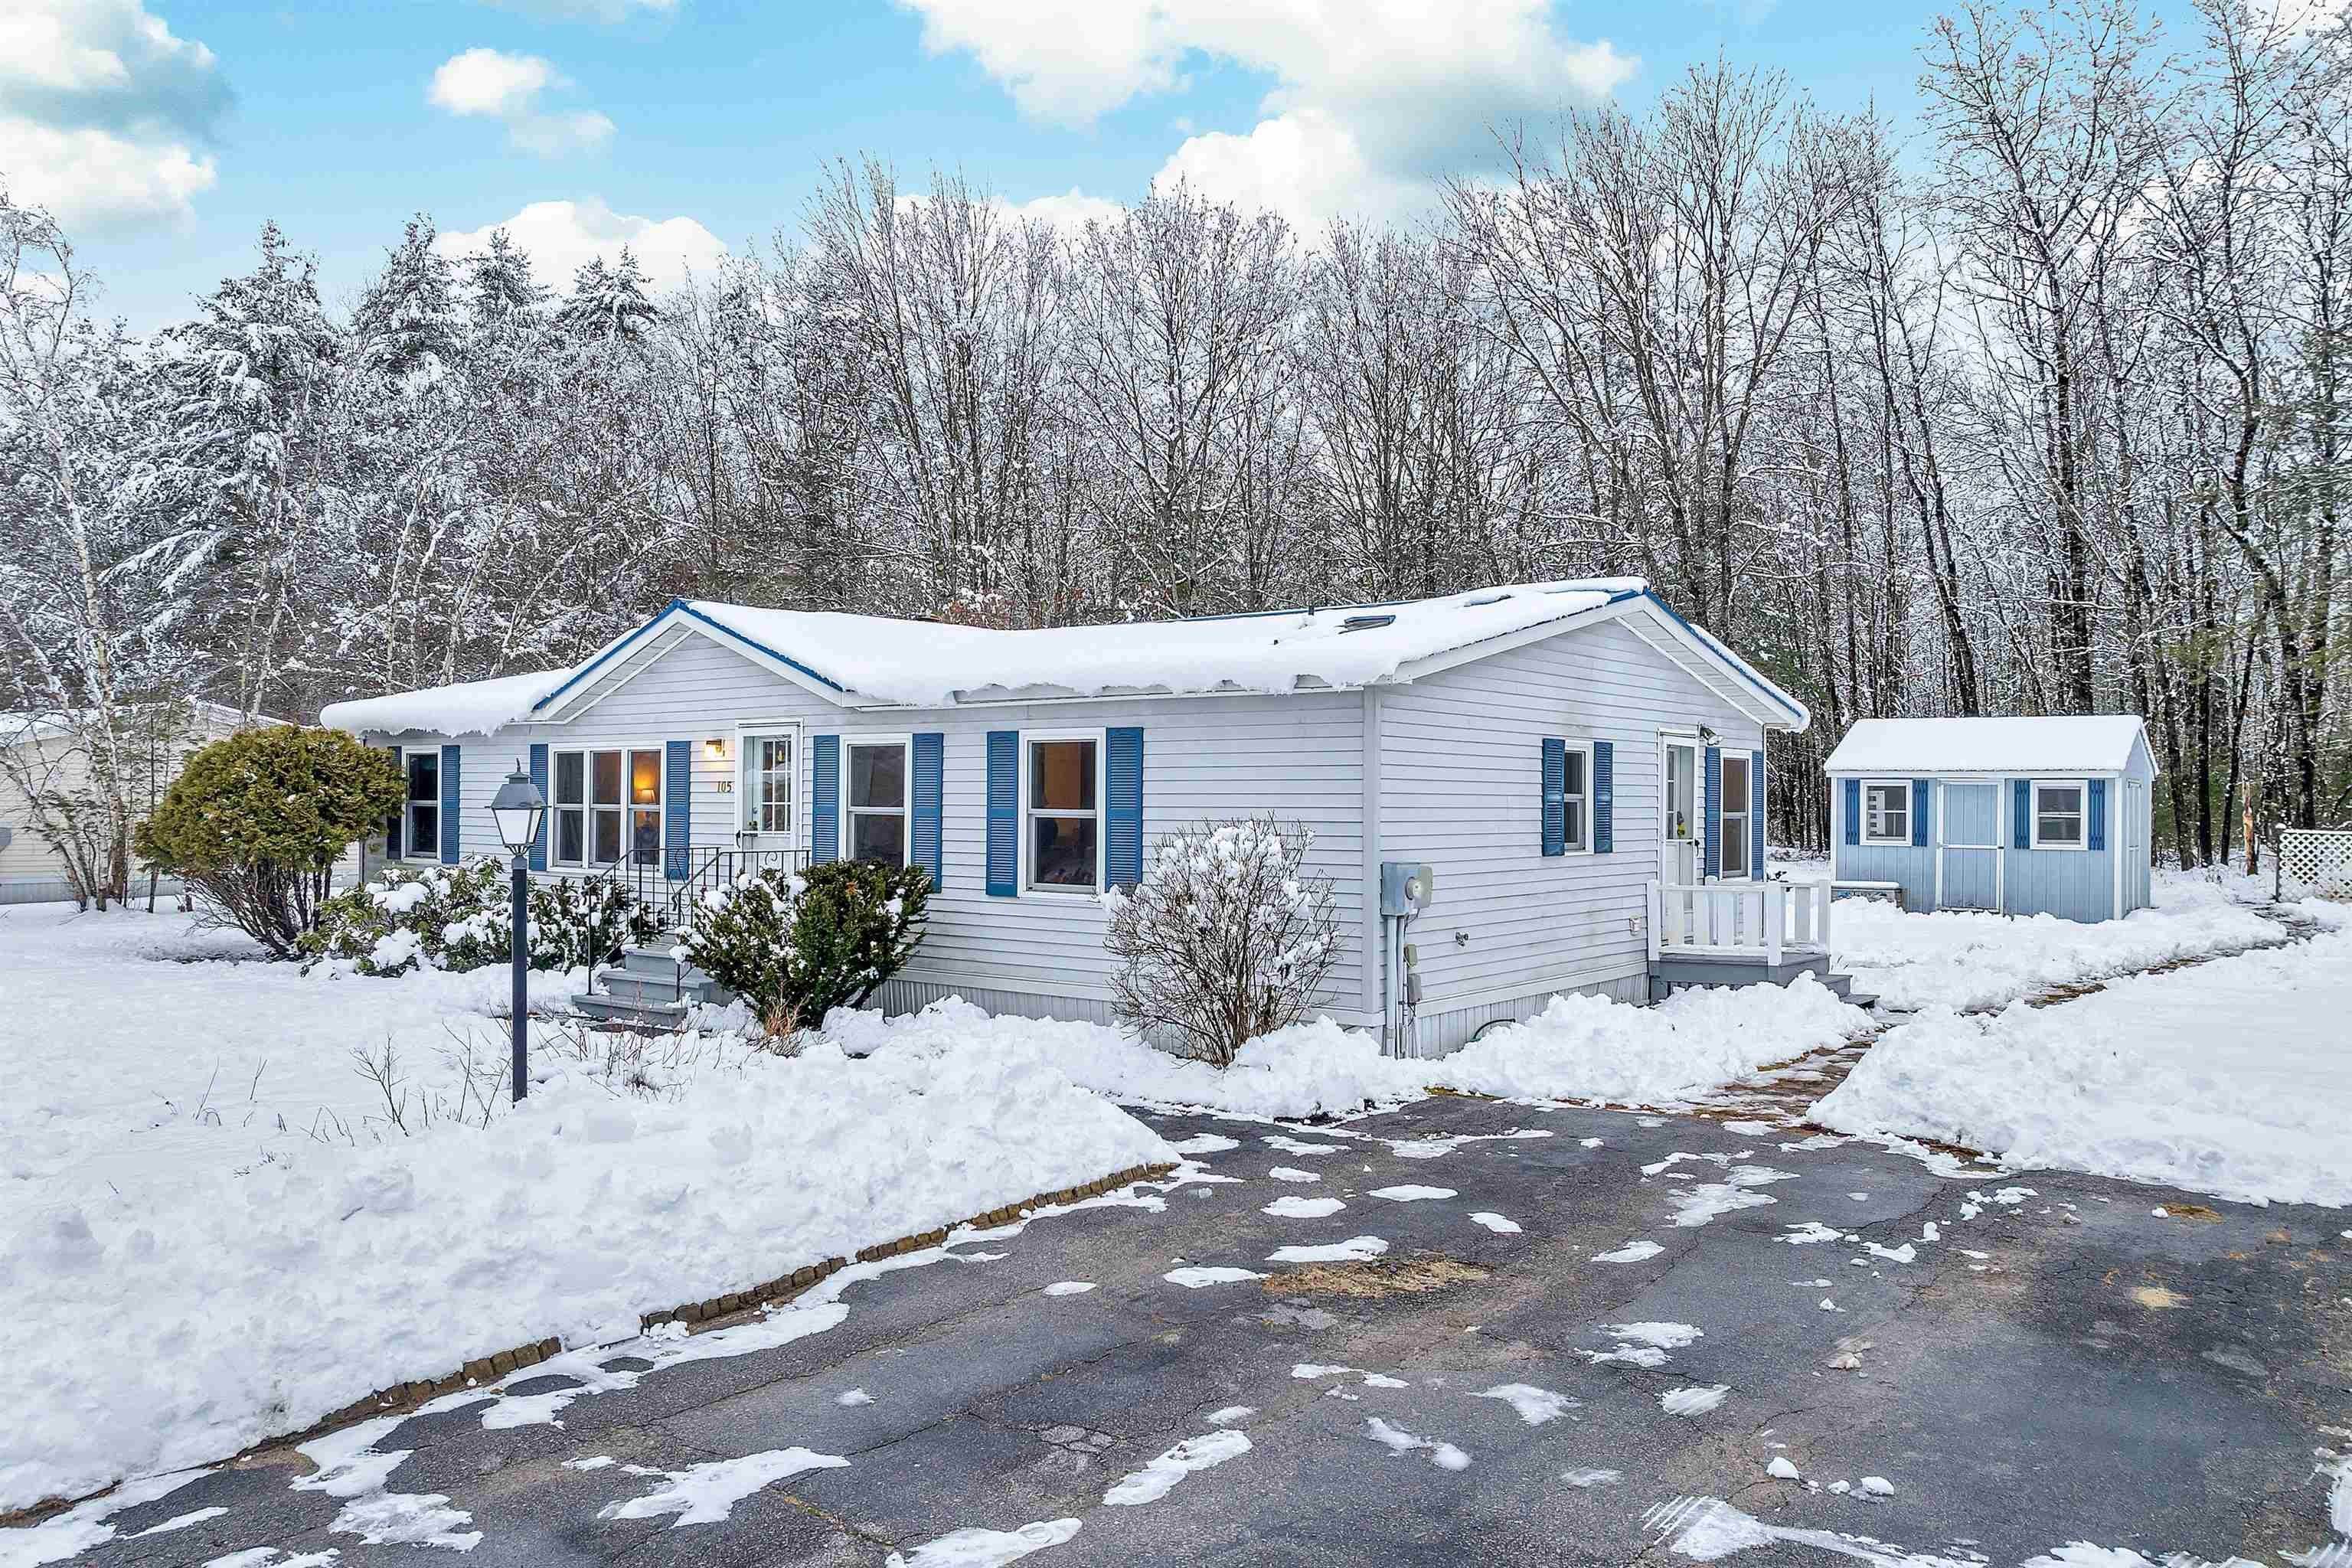 3. Mobile Homes for Sale at Hopkinton, NH 03229